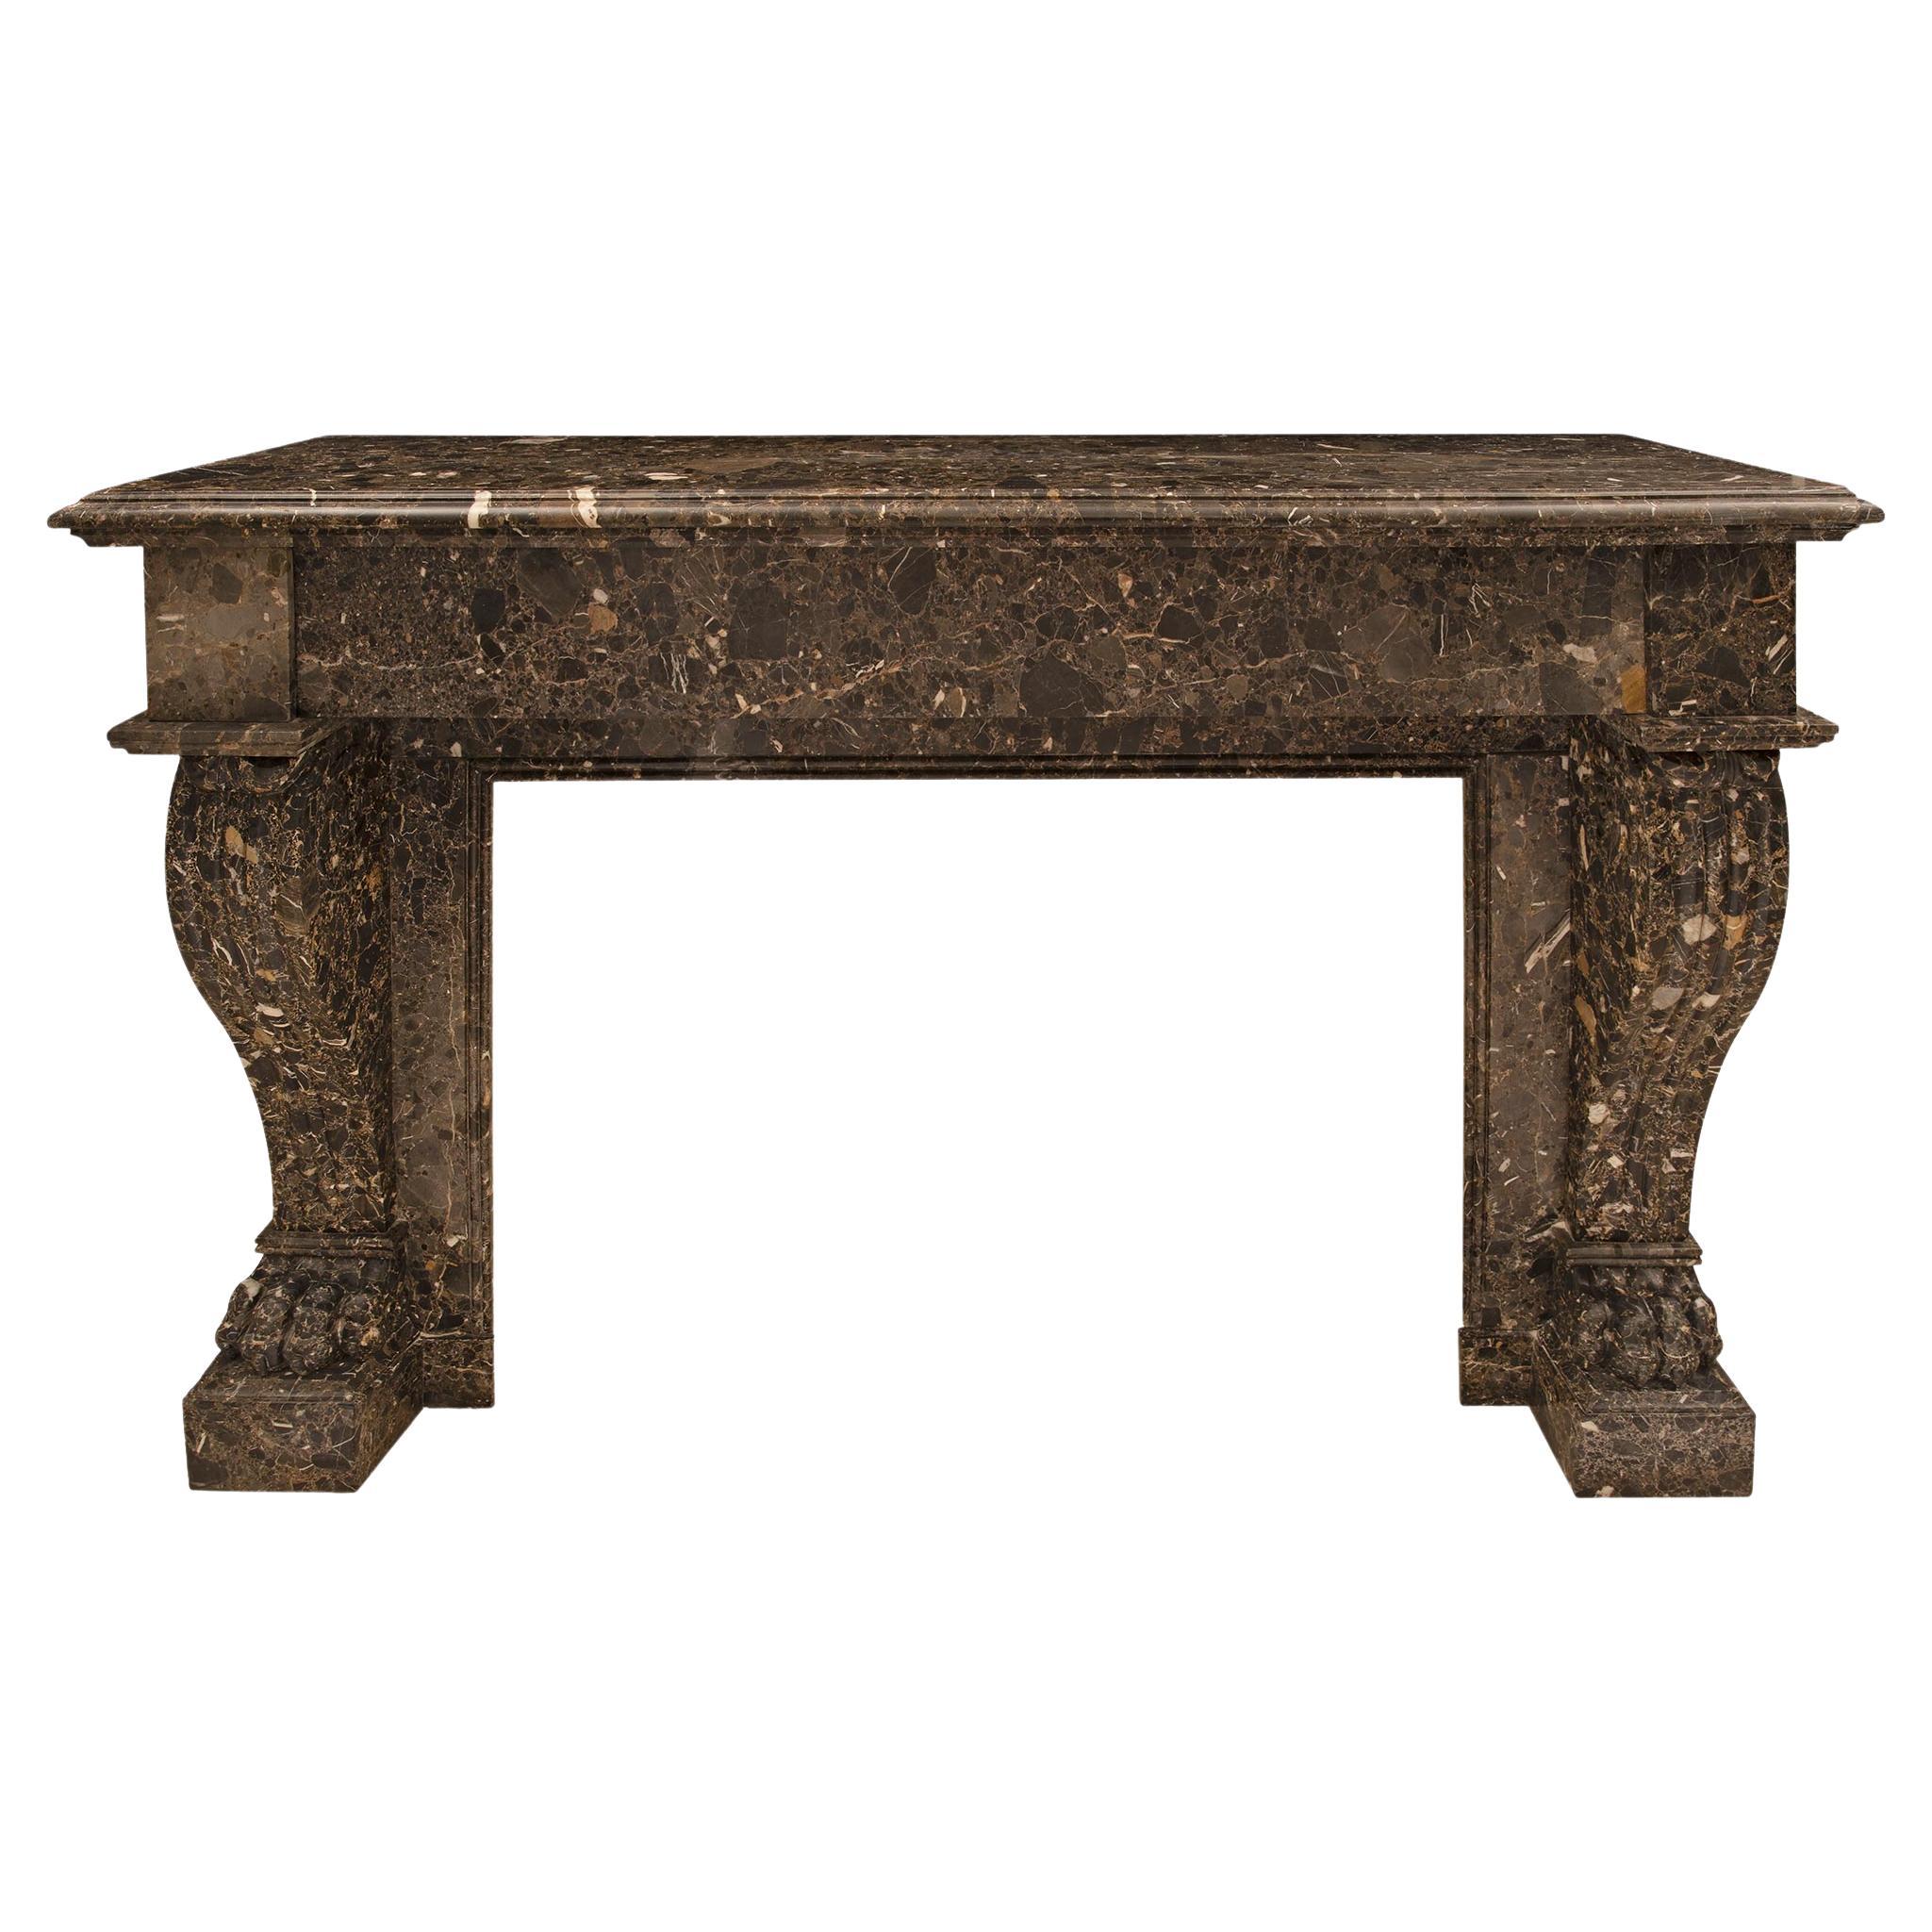 French 19th Century Neo-Classical St. Roman Brèche Marble Mantel For Sale